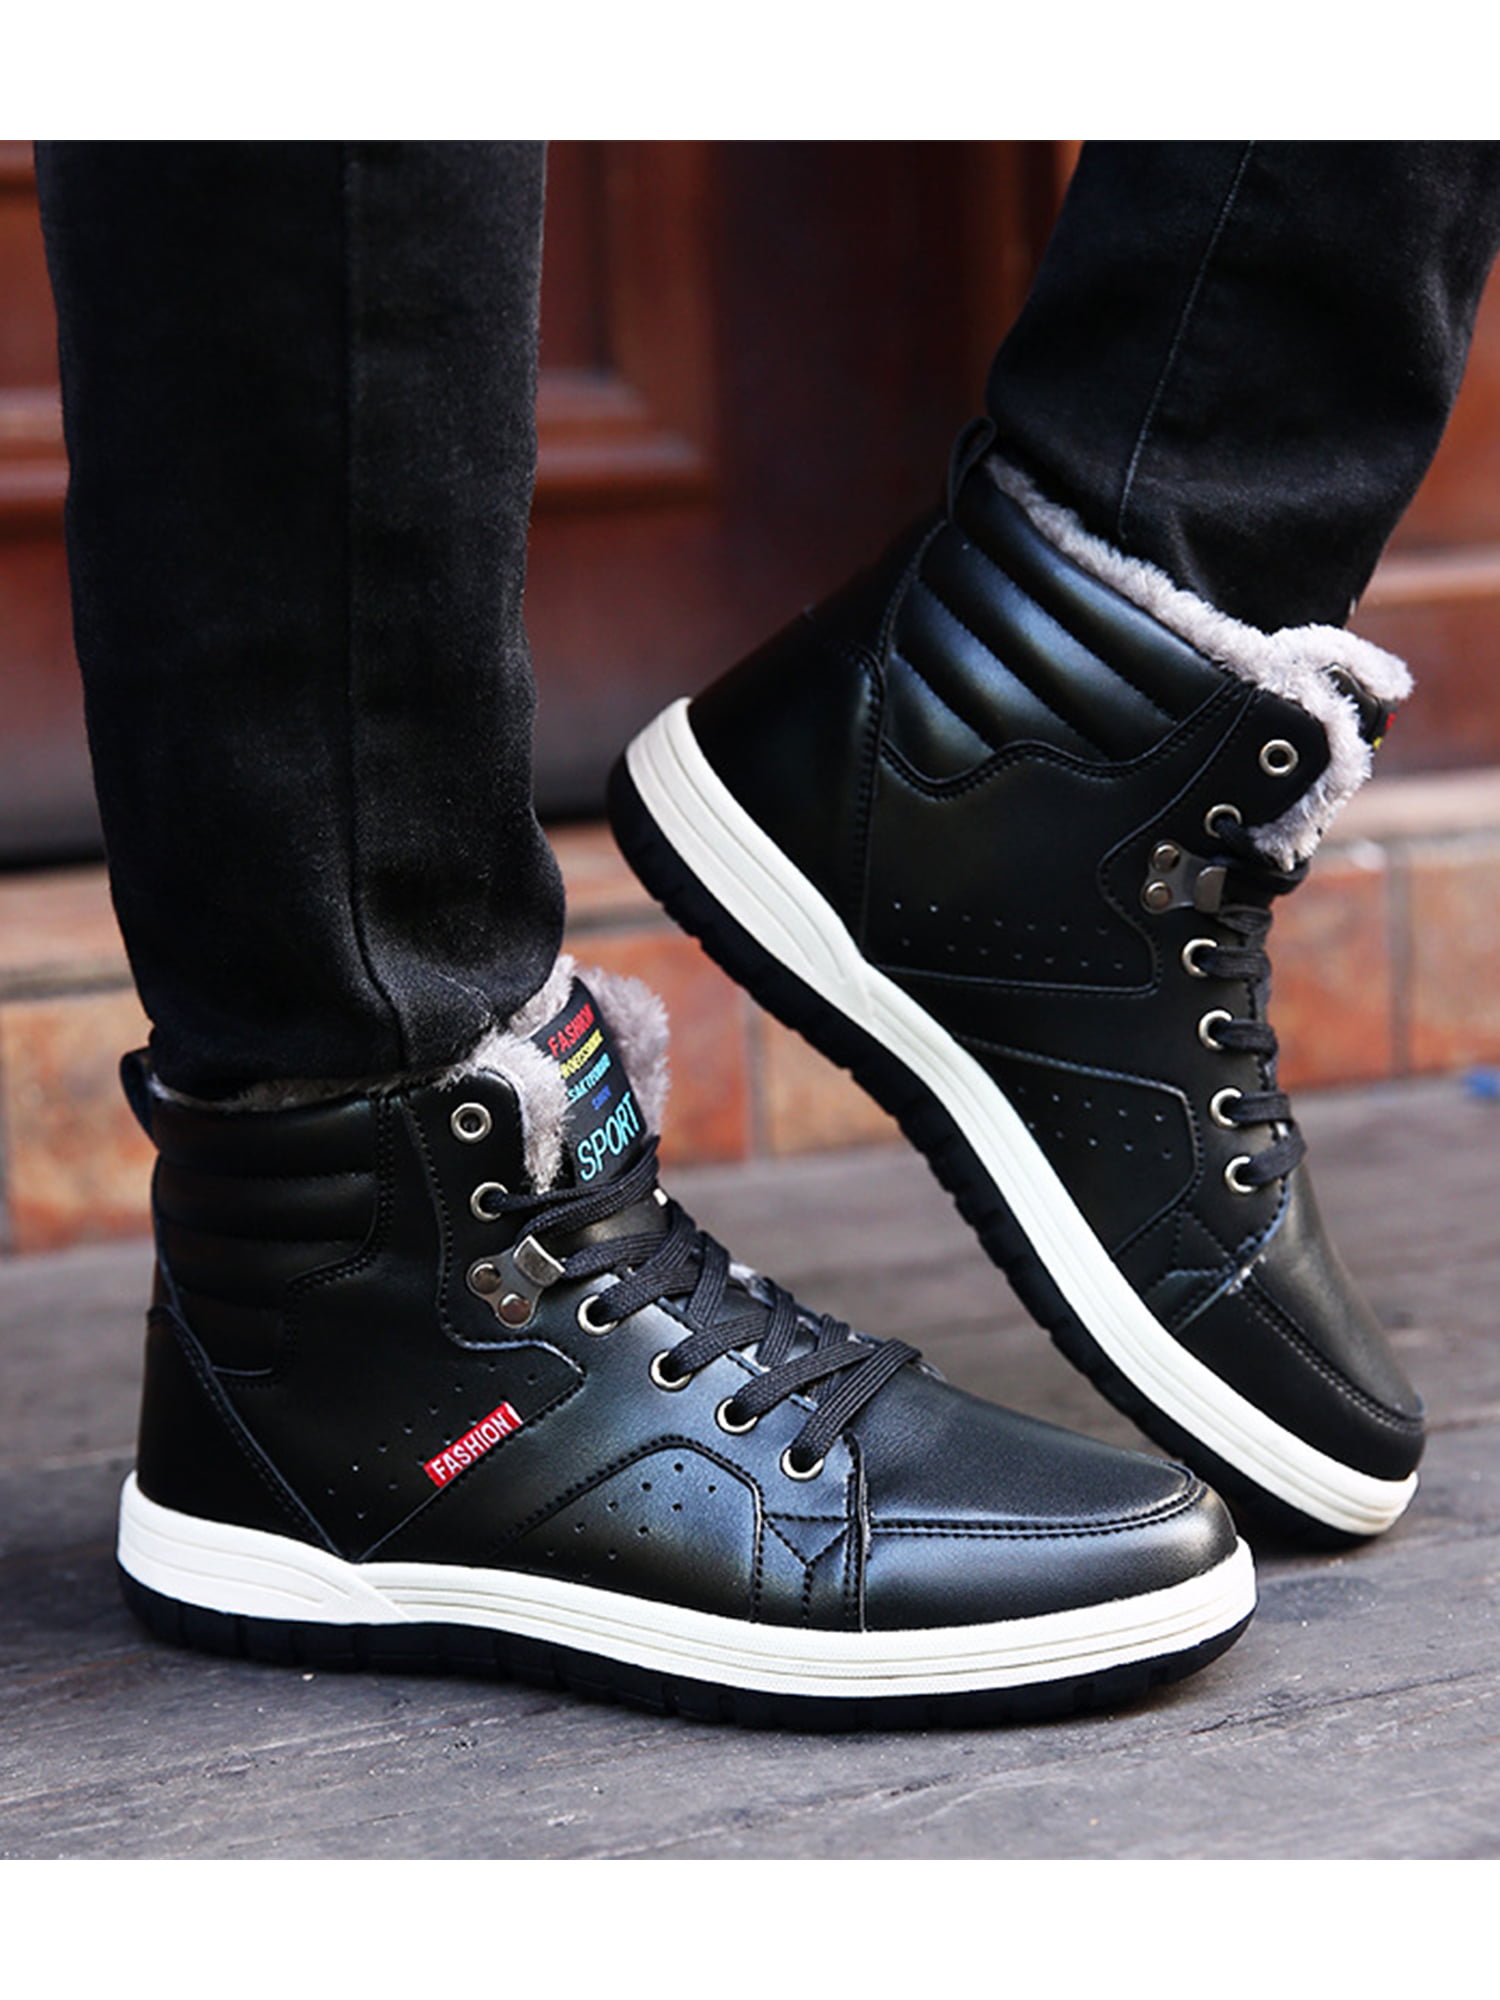 Ceyue Mens Leather Snow Boots Lace up Ankle Sneakers High Top Winter Shoes with Fur Lining 